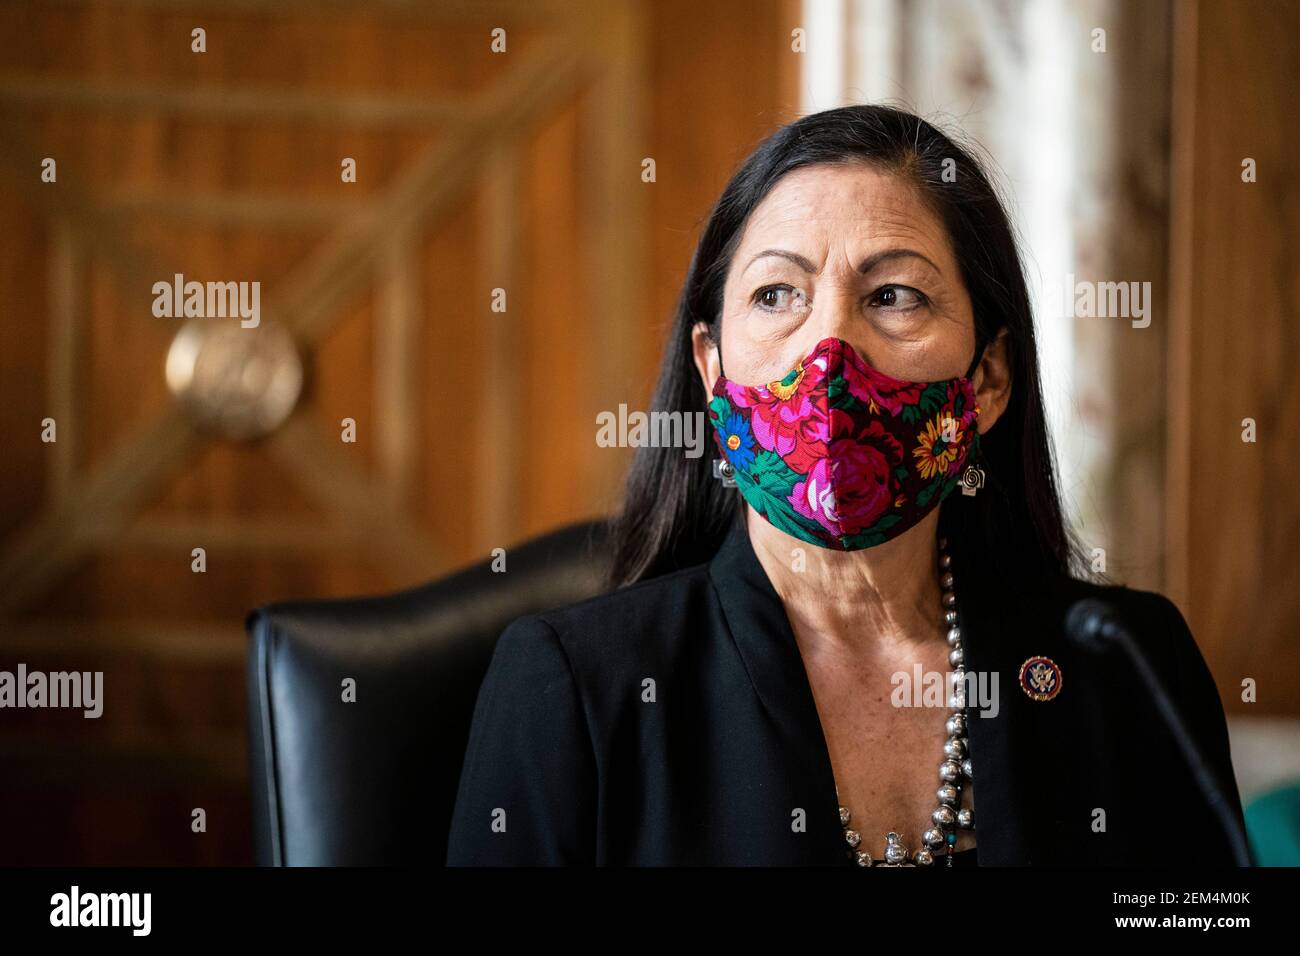 Representative Deb Haaland, a Democrat from New Mexico and secretary of the interior nominee for U.S. President Joe Biden, prepares to testify during a Senate Energy and Natural Resources Committee confirmation hearing in Washington, D.C., U.S., on Wednesday, Feb. 24, 2021. Haaland downplayed her past opposition to fracking during a heated hearing yesterday as she sought to reassure senators worried she would clamp down on fossil fuel development. Photo by Sarah Silbiger/Pool/Sipa USA) Stock Photo